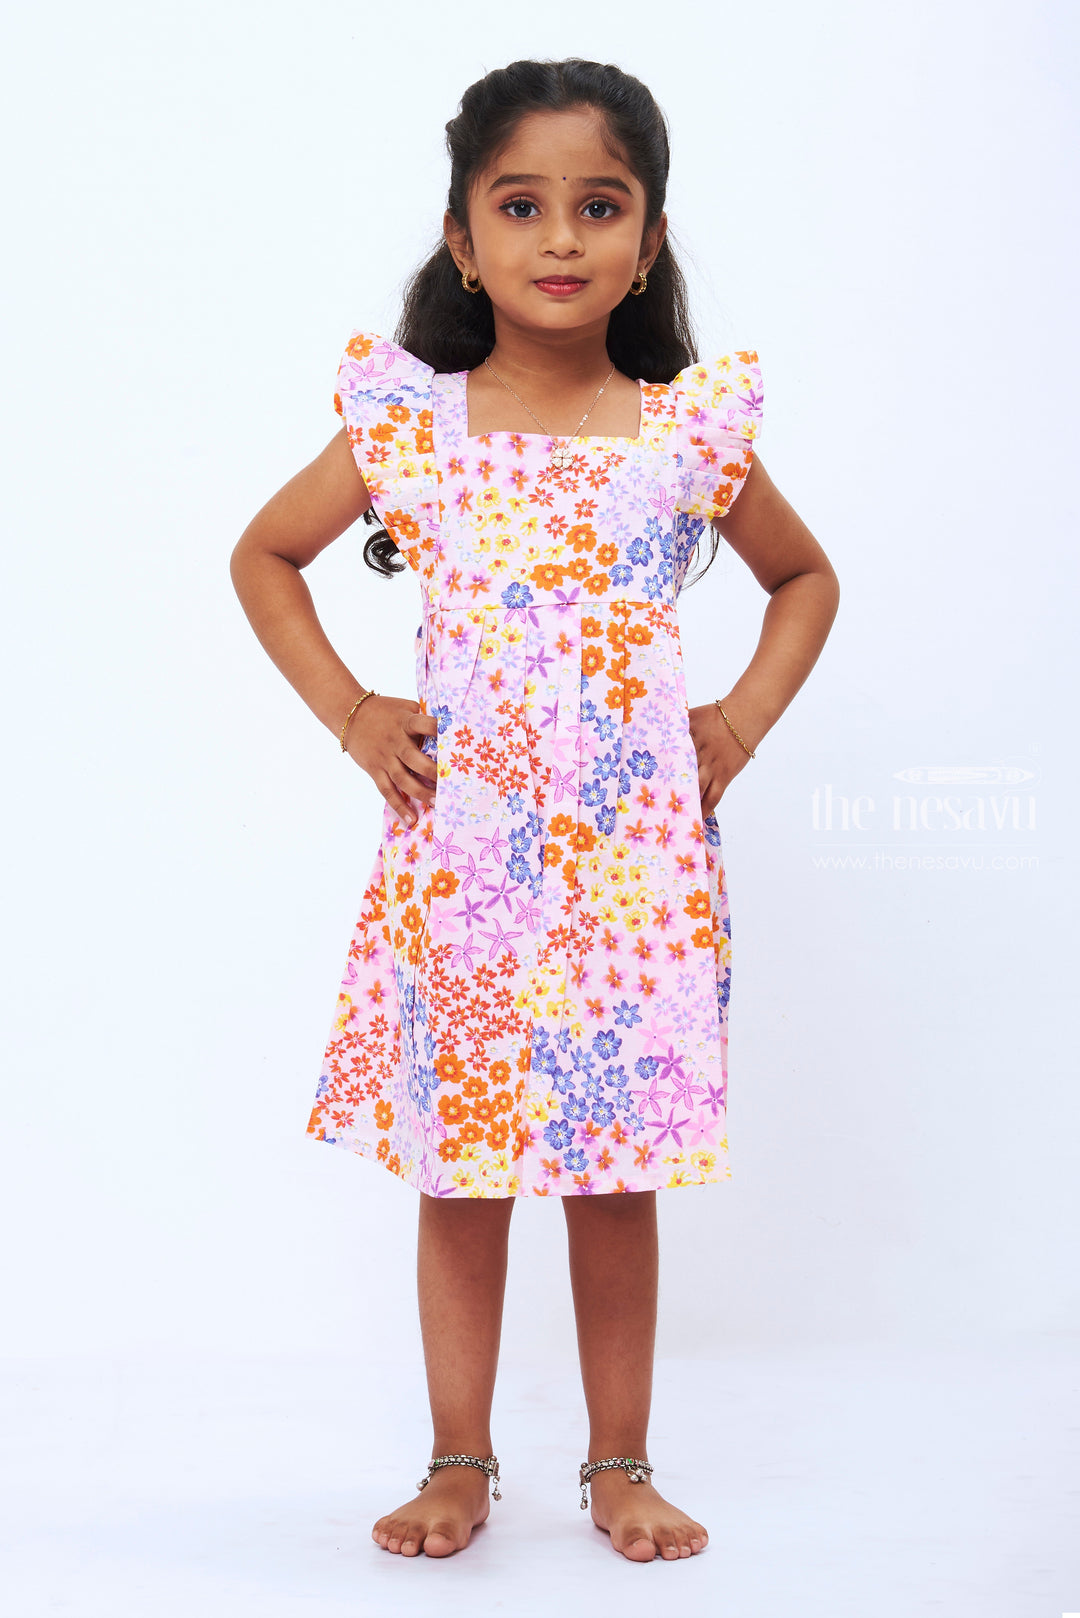 The Nesavu Girls Cotton Frock Girls Summer Blossom Pink Cotton Frock with Pastel Floral Print Nesavu 14 (6M) / Pink / Cotton GFC1222A-14 Girls Pastel Floral Cotton Dress | Playful Pretty Summer Frock | The Nesavu